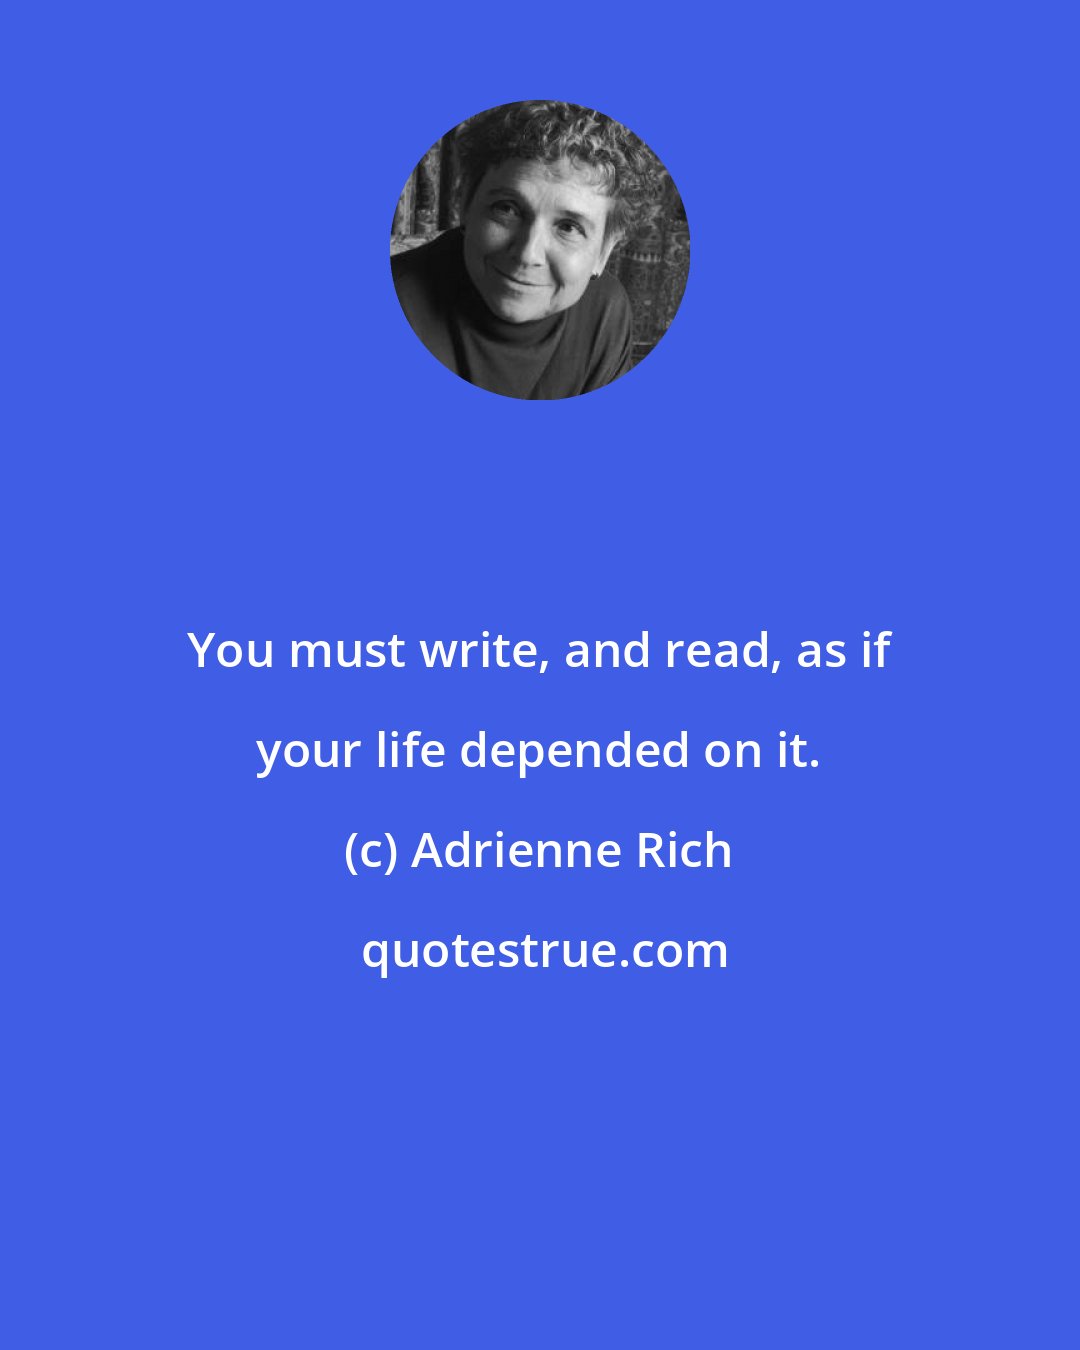 Adrienne Rich: You must write, and read, as if your life depended on it.